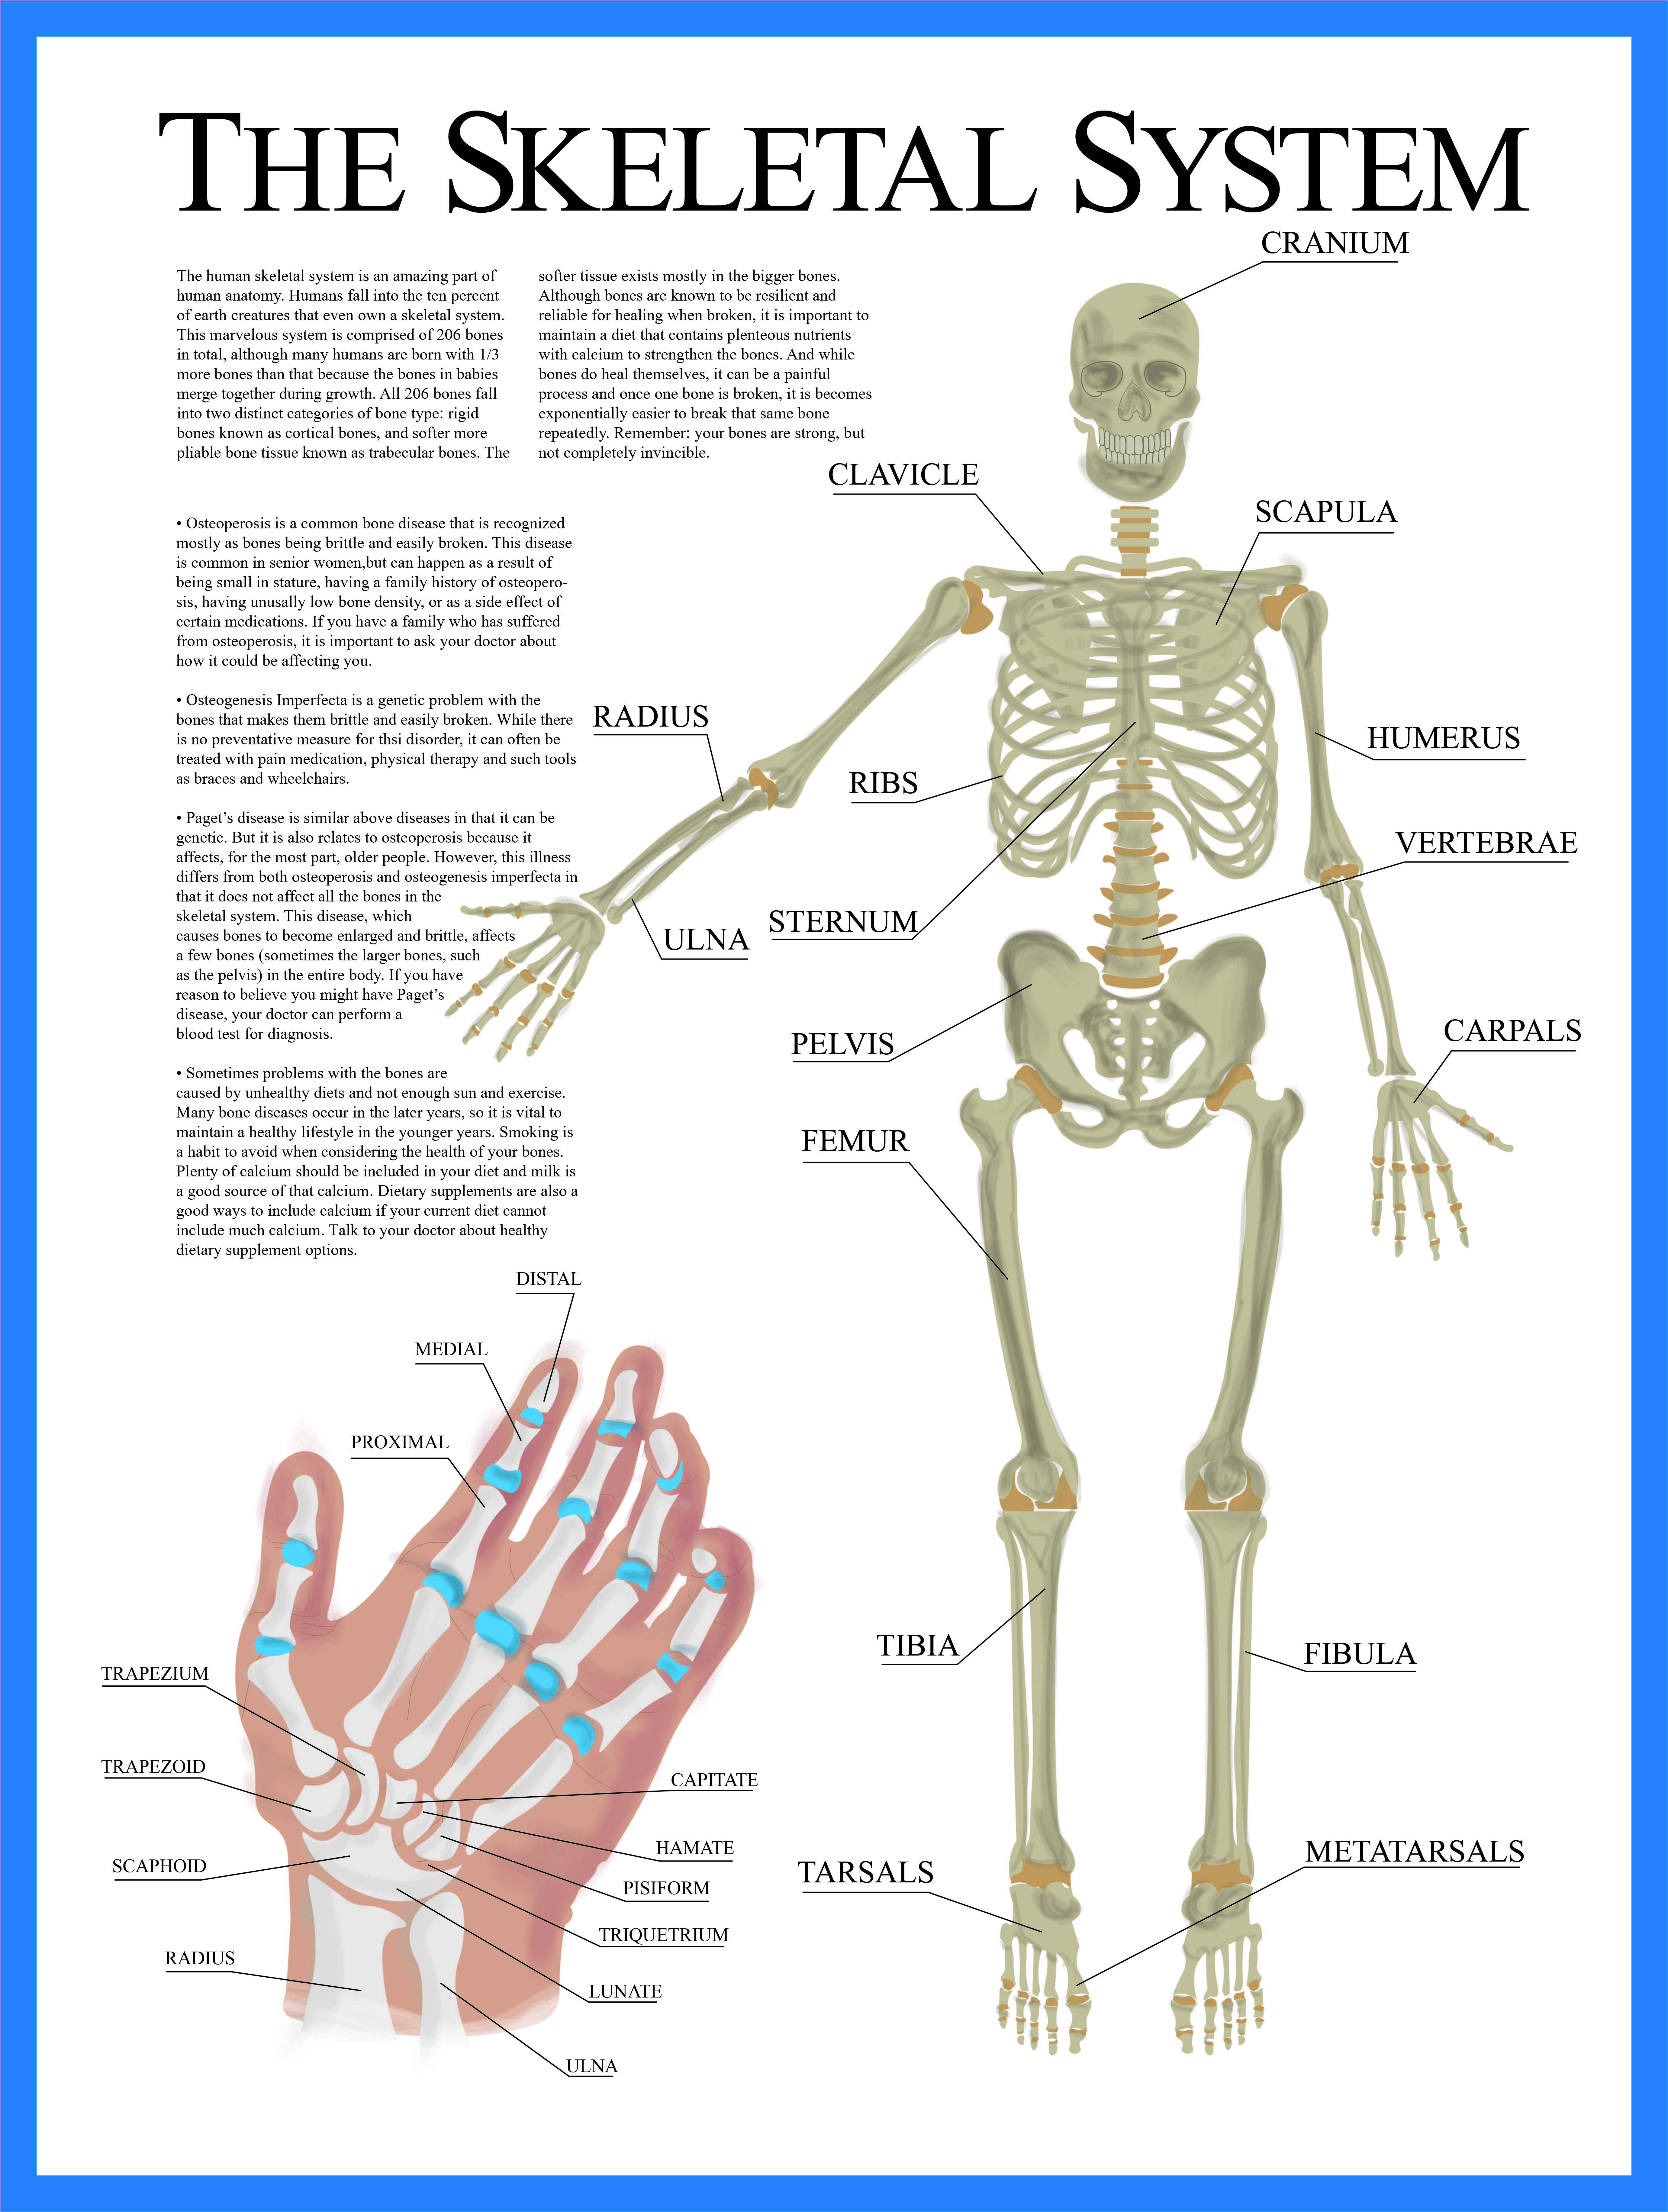 EXAMPLE POSTER of The Skeletal System